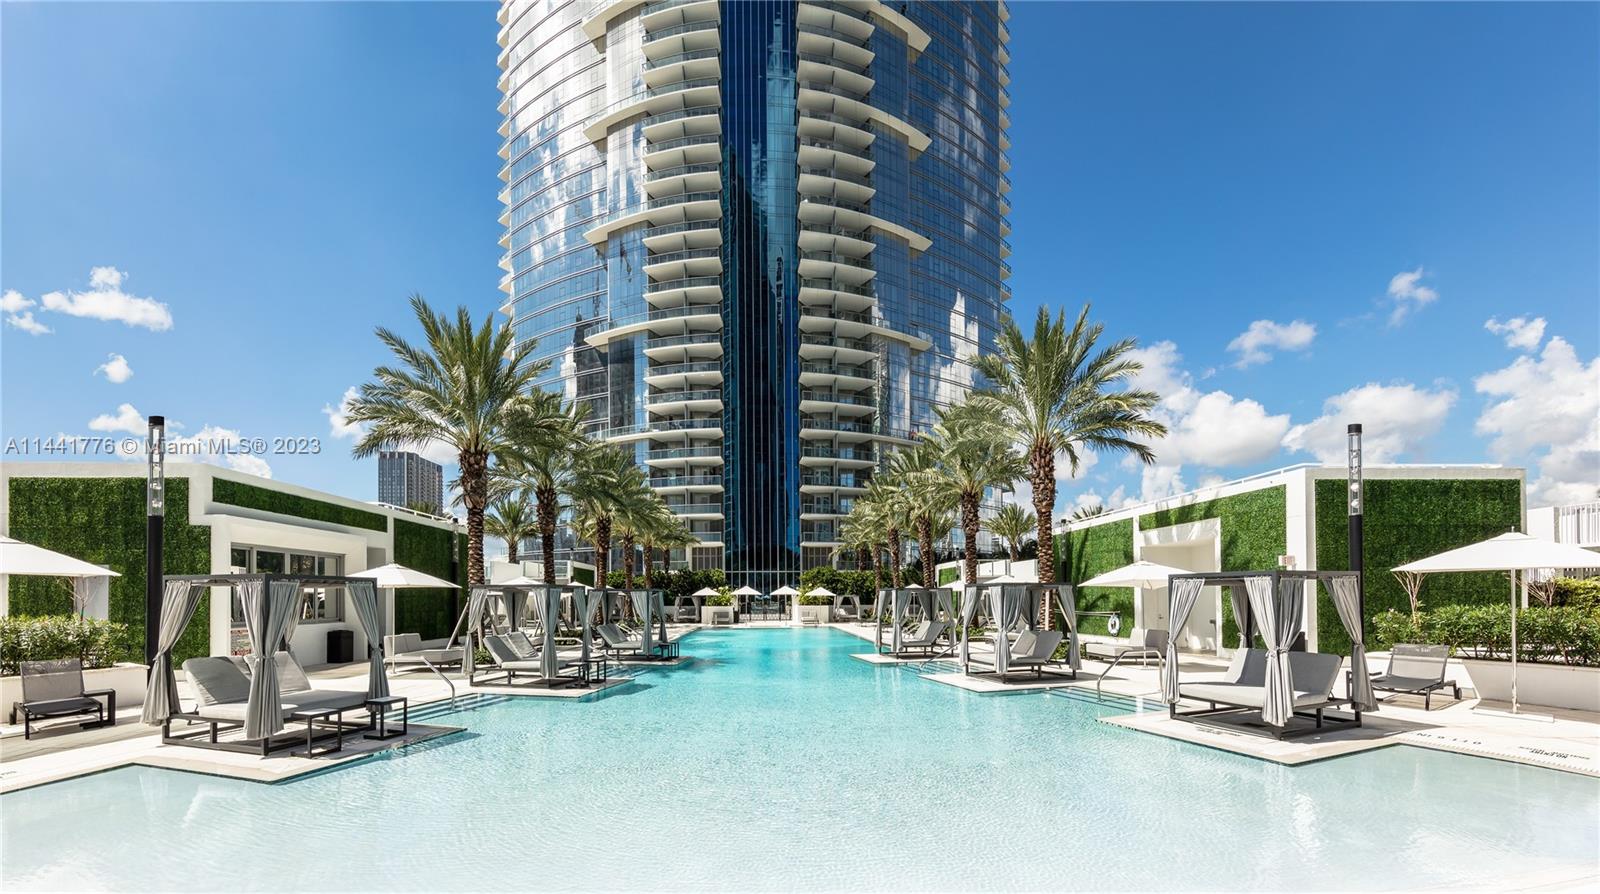 Five Park Miami Beach an unrivaled living experience